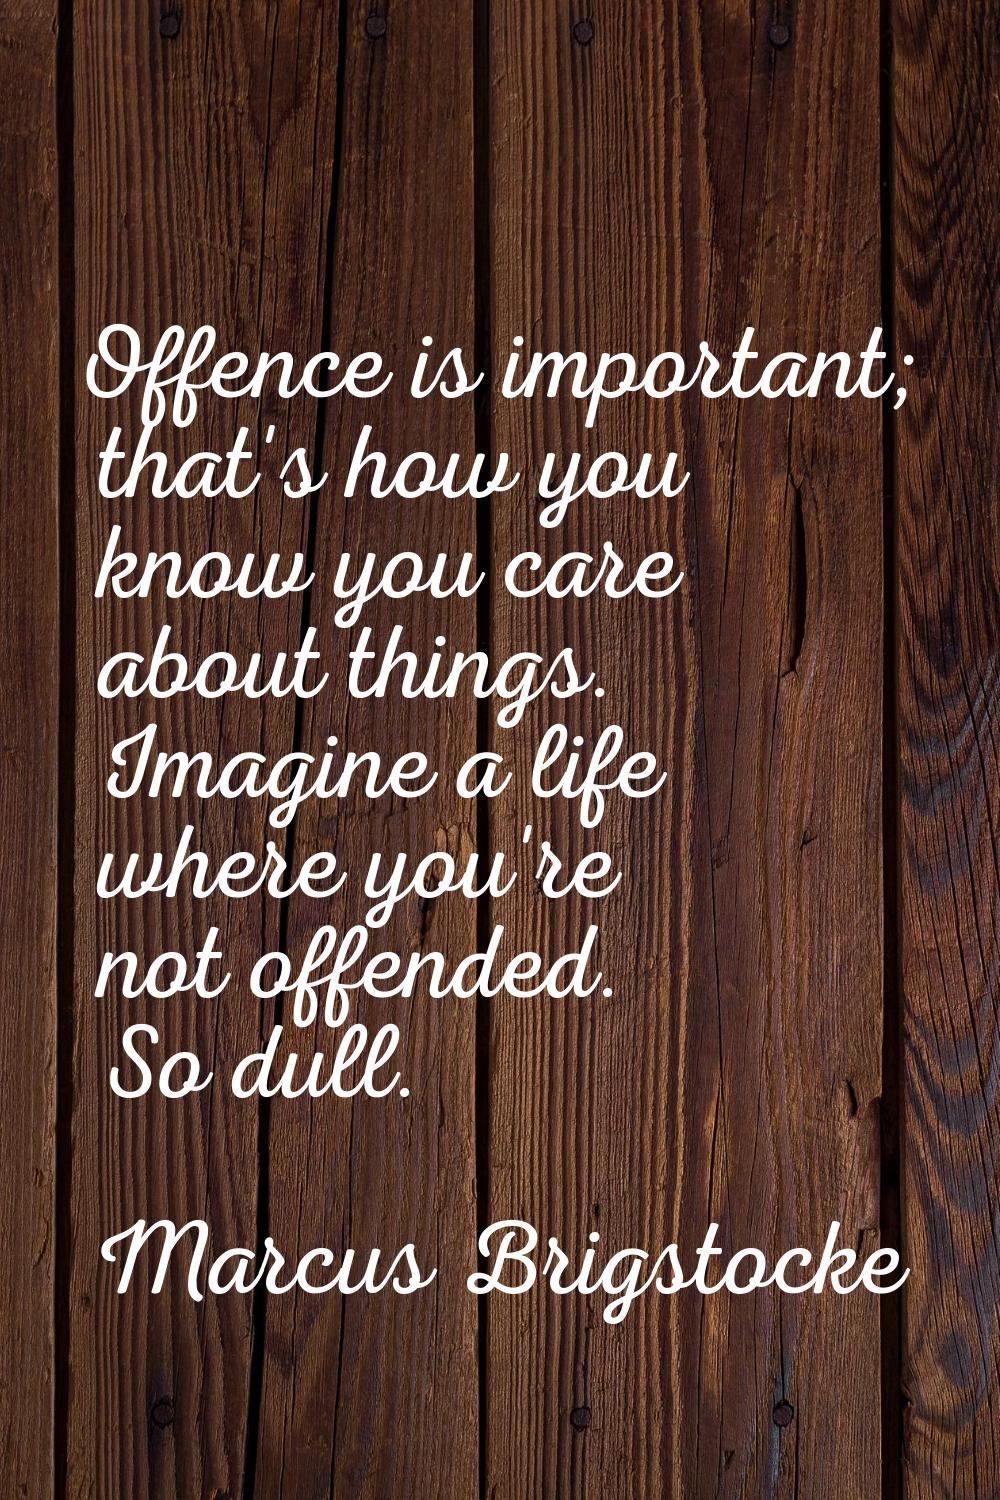 Offence is important; that's how you know you care about things. Imagine a life where you're not of